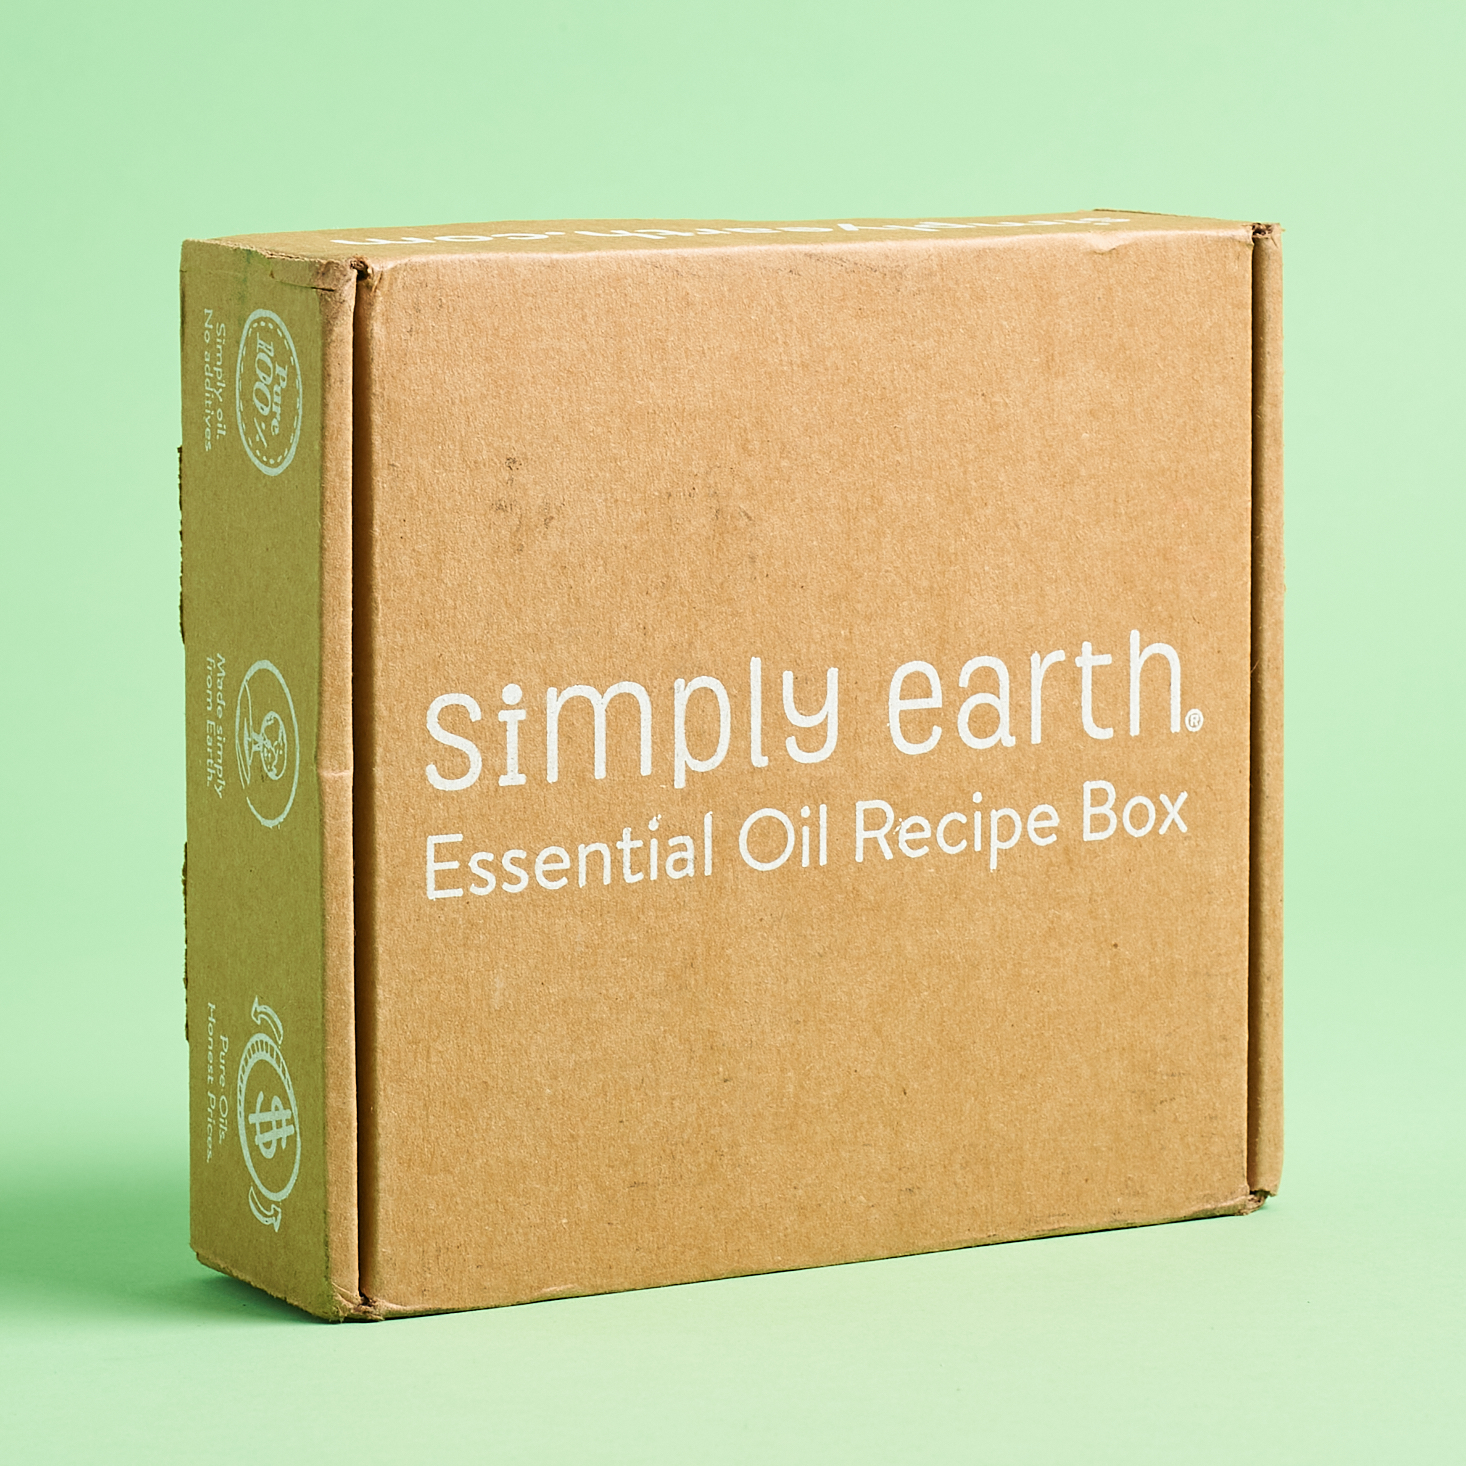 Simply Earth Essential Oil Recipe Box Review + Coupon – January 2021